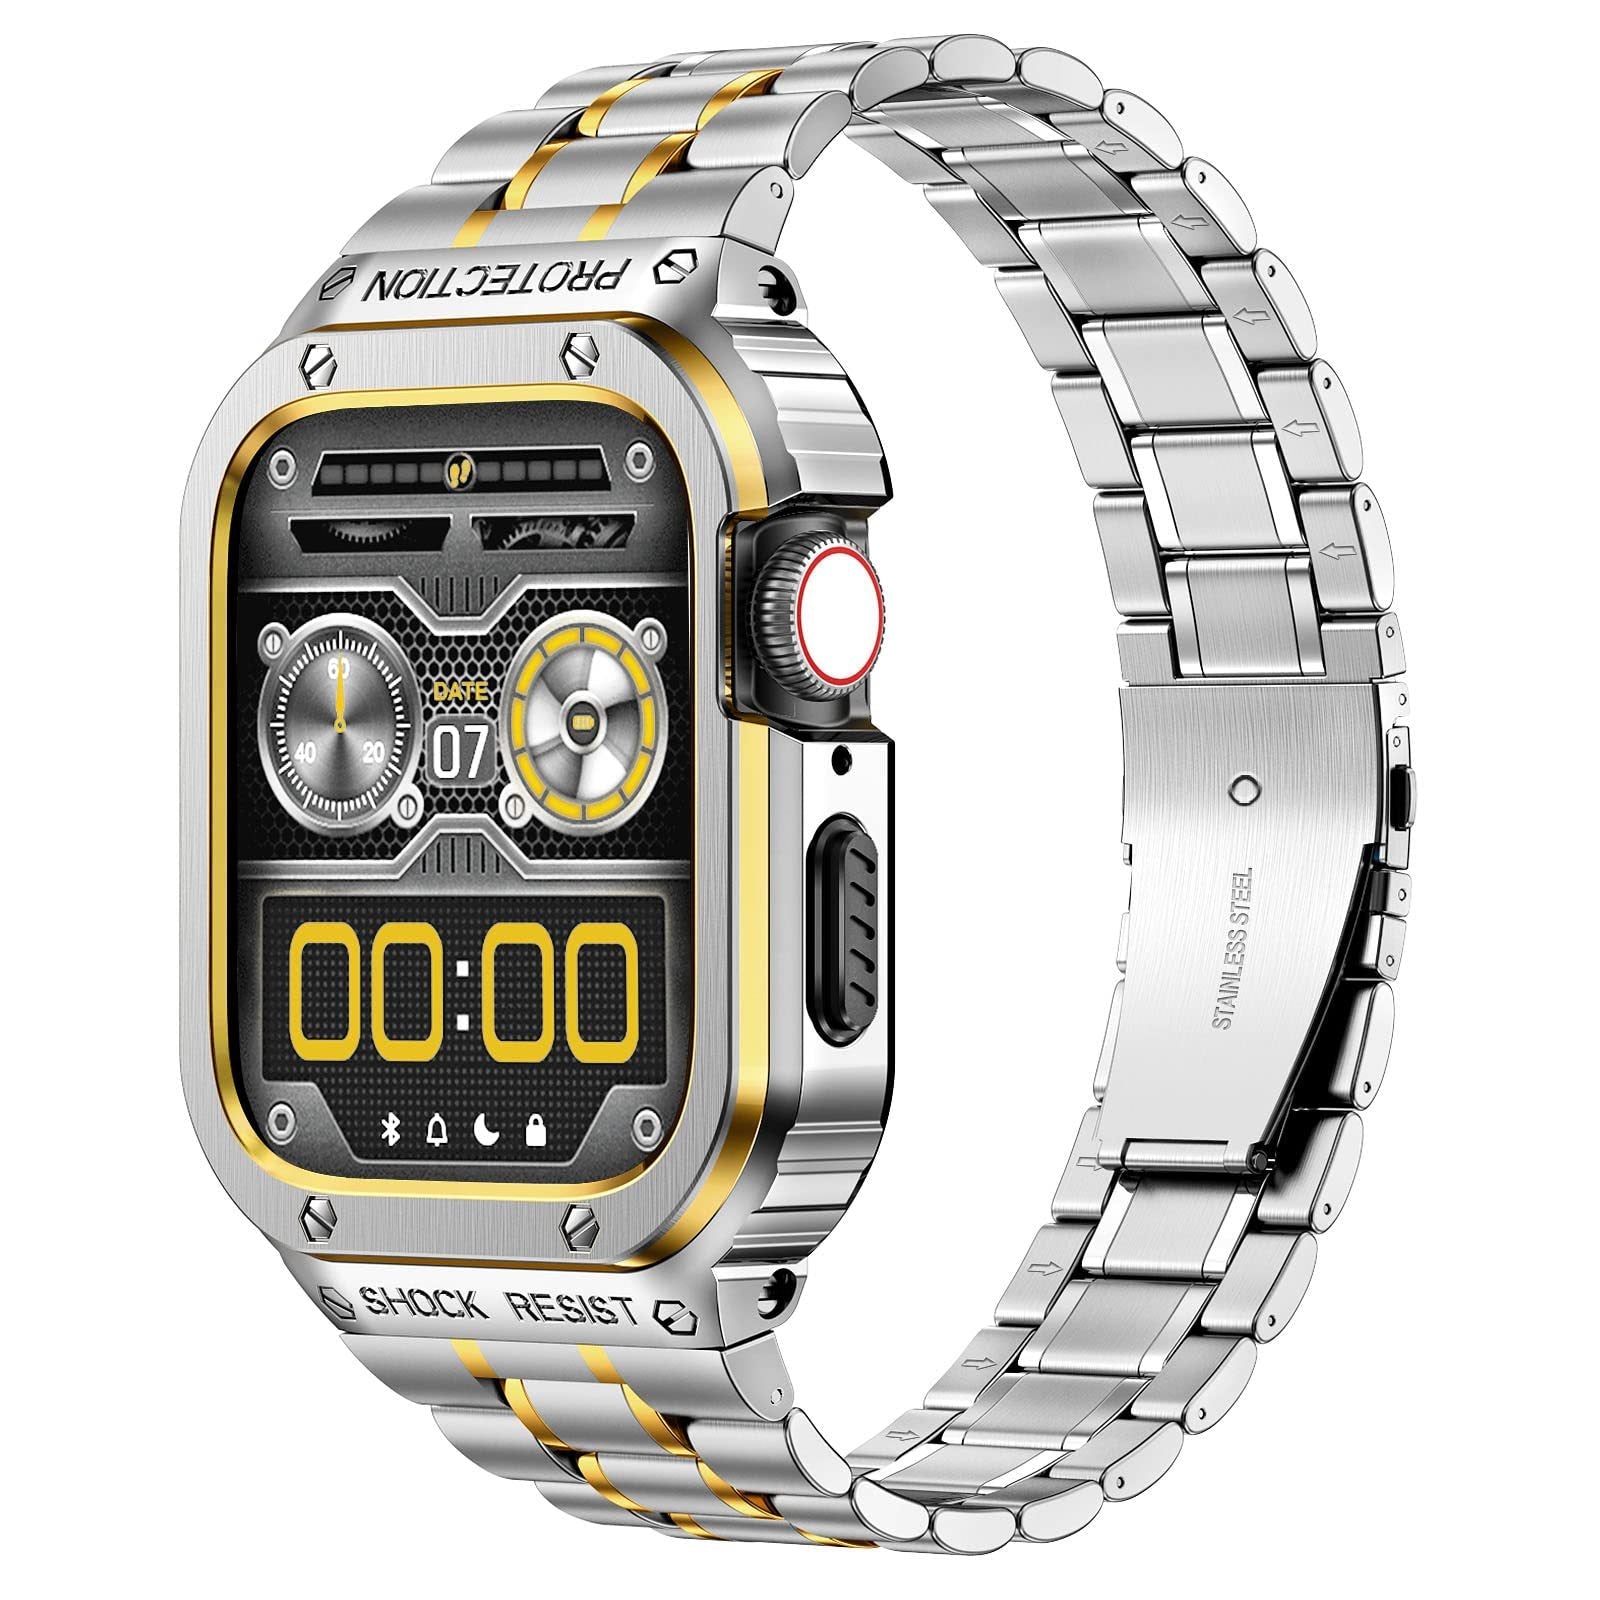 Stainless Steel Band With Case For Apple Watch